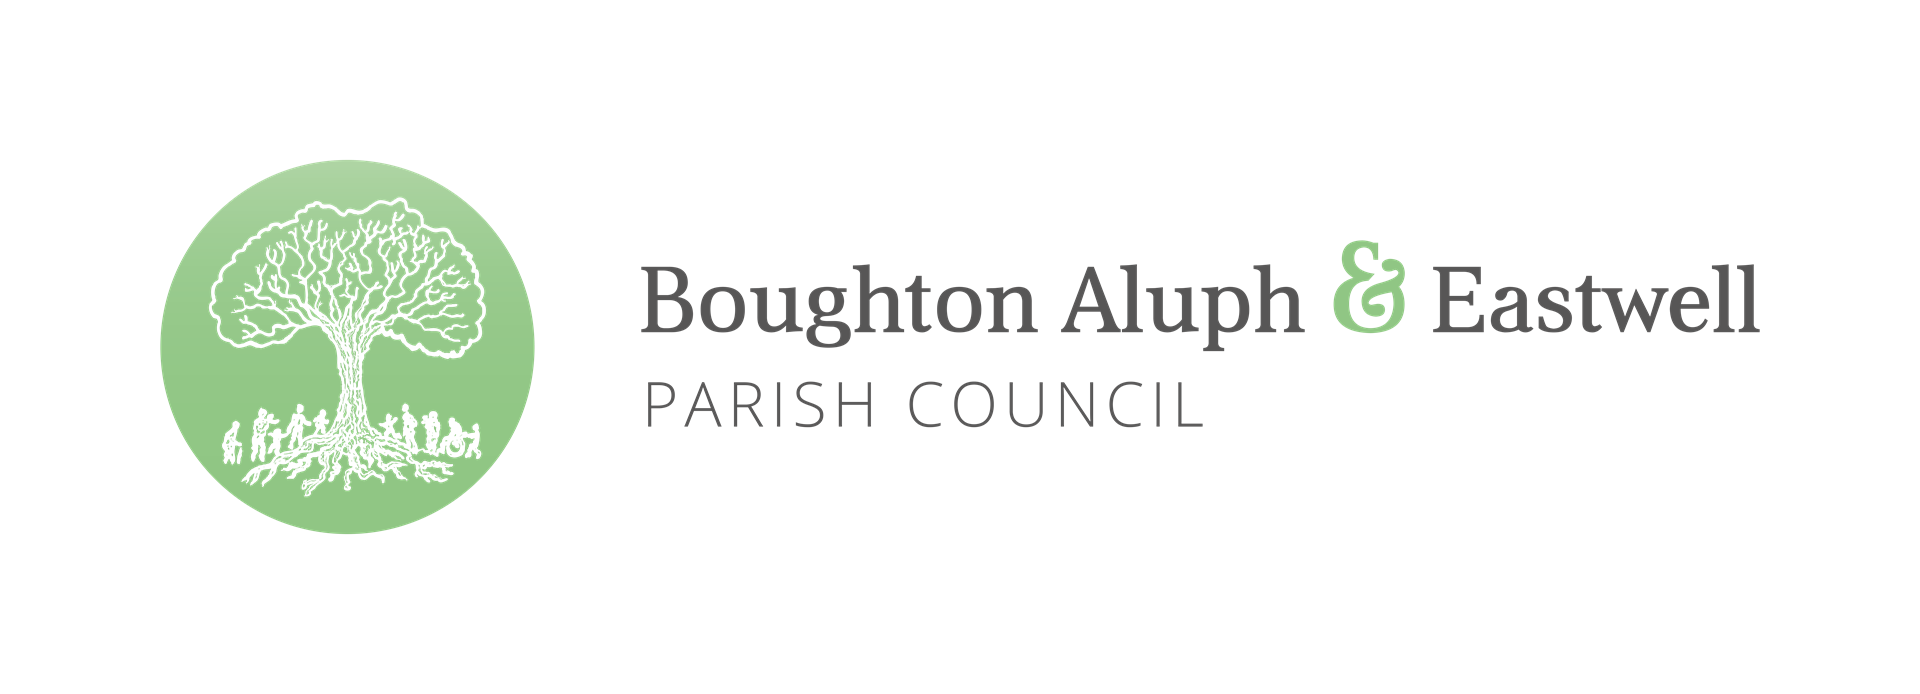 Boughton Aluph & Eastwell Parish Council Home